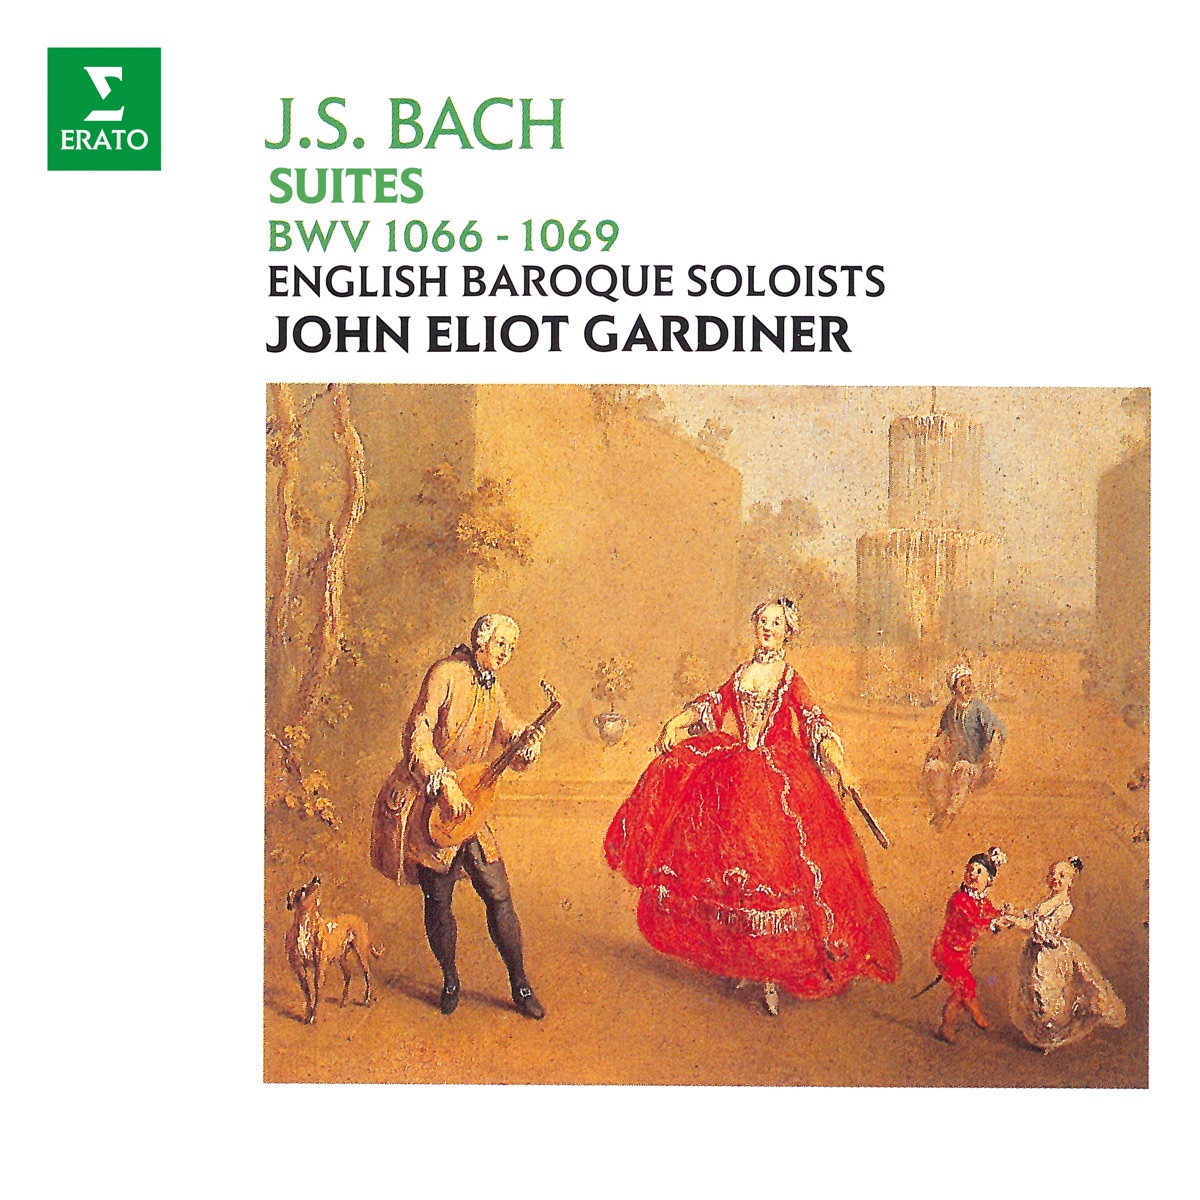 Bach: Orchestral Suites, BWV 1066 - 1069 by John Eliot Gardiner & English  Baroque Soloists on Apple Music